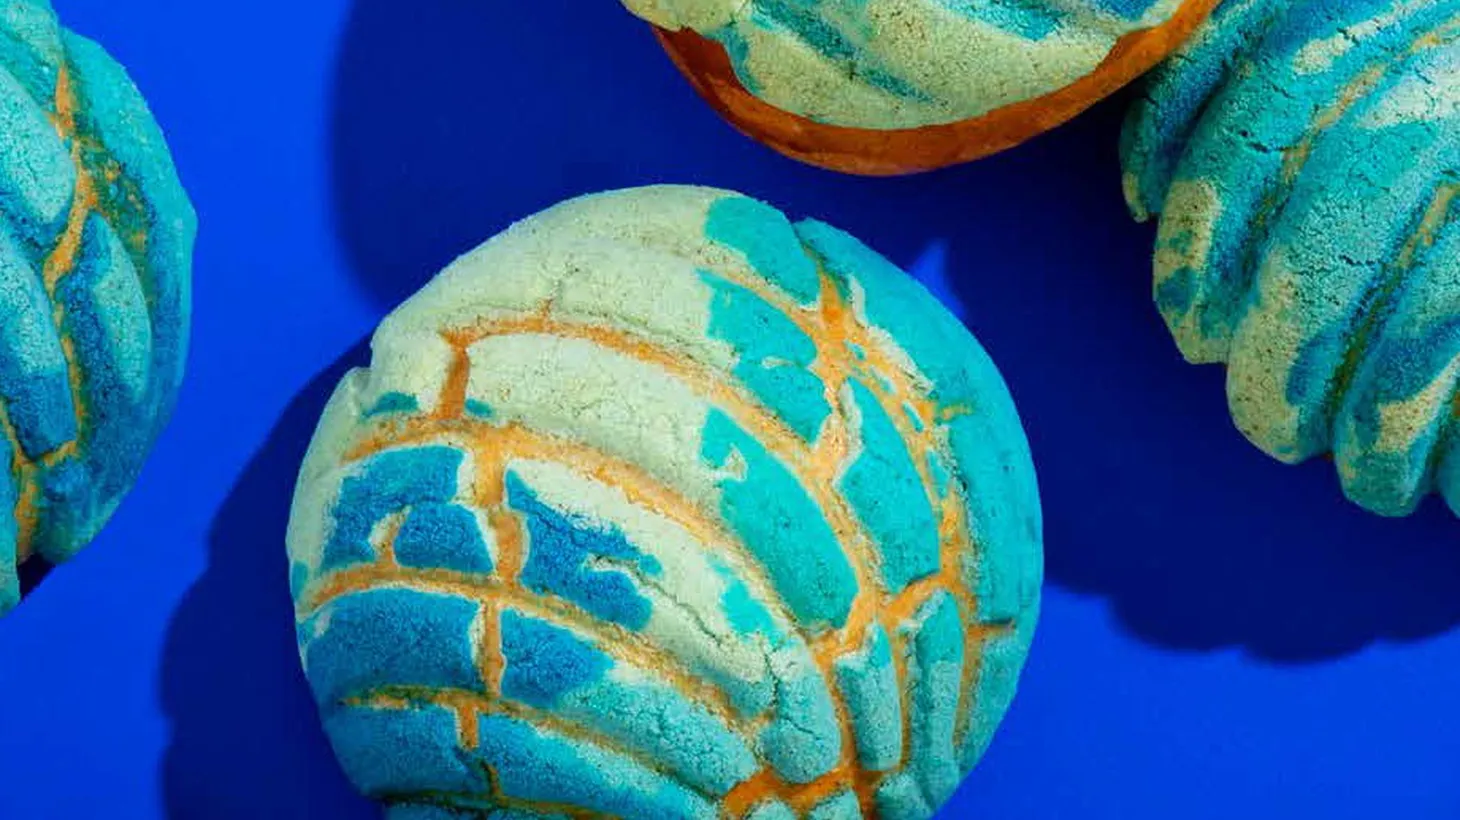 “Conchas have become the symbol of pan dulce here in the U.S.,” says Chicano Eats blogger and cookbook author Esteban Castillo.